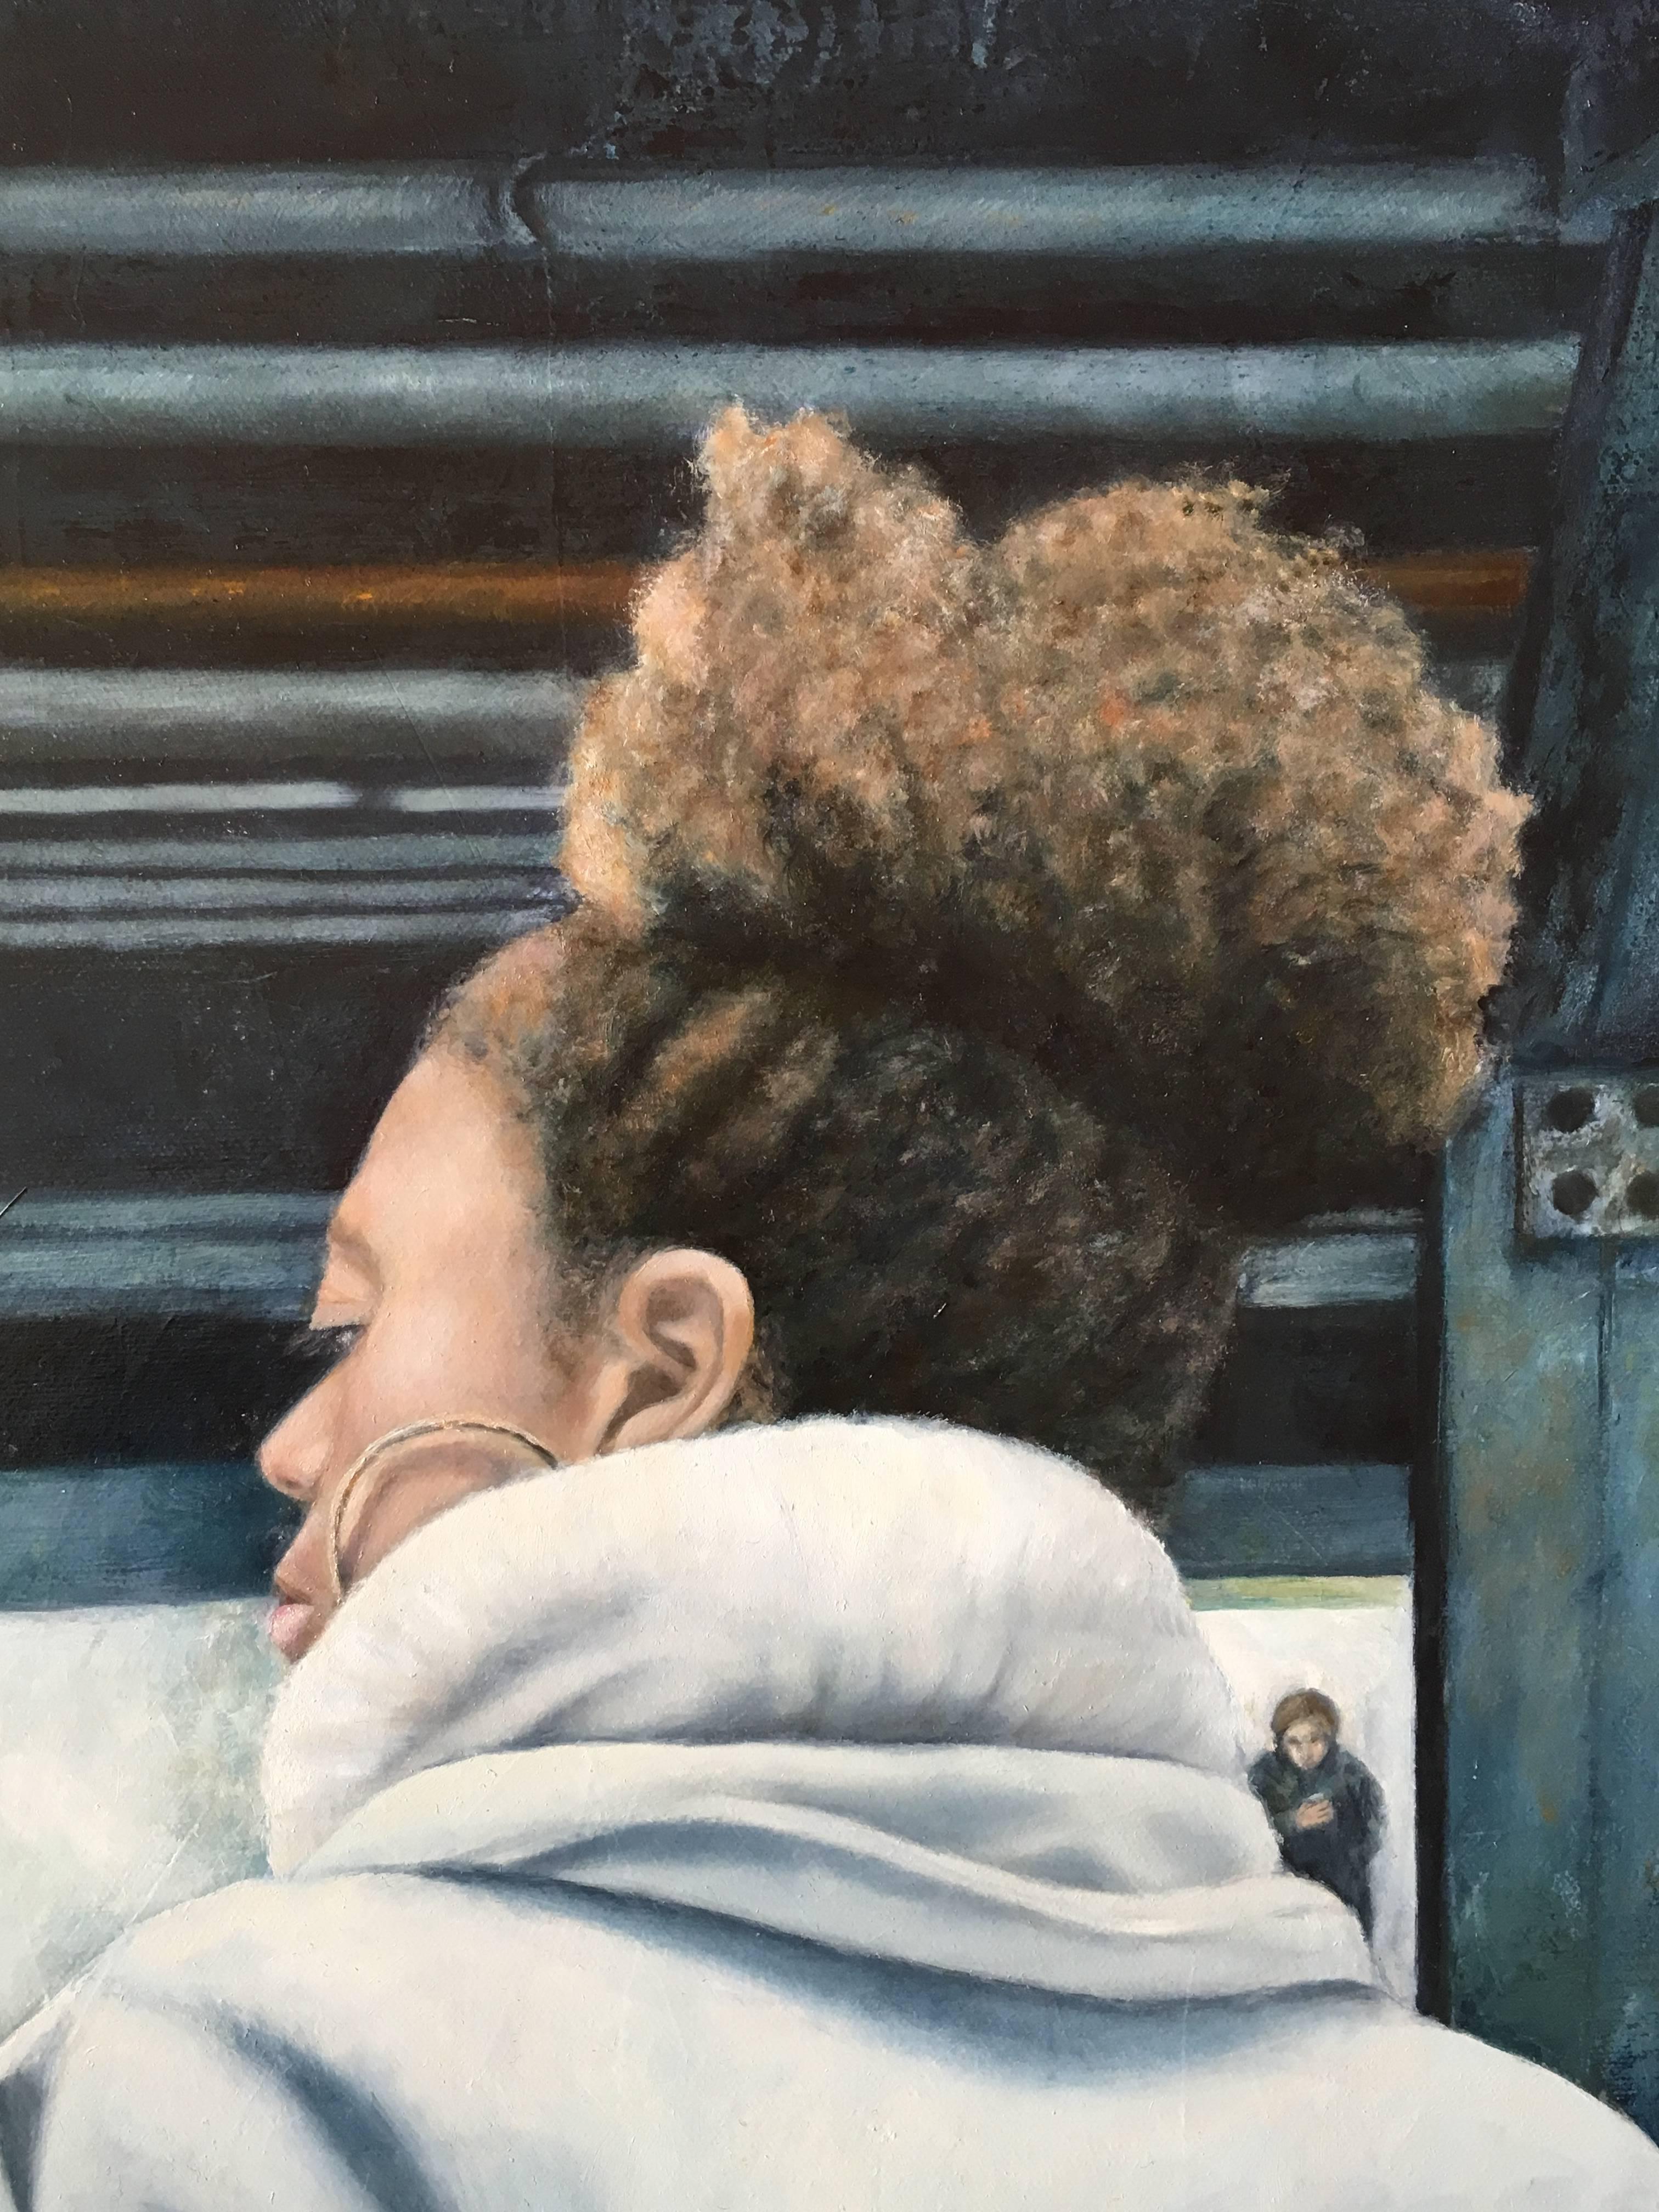 The Angel of Prince Street Station - Painting by Kris Galli